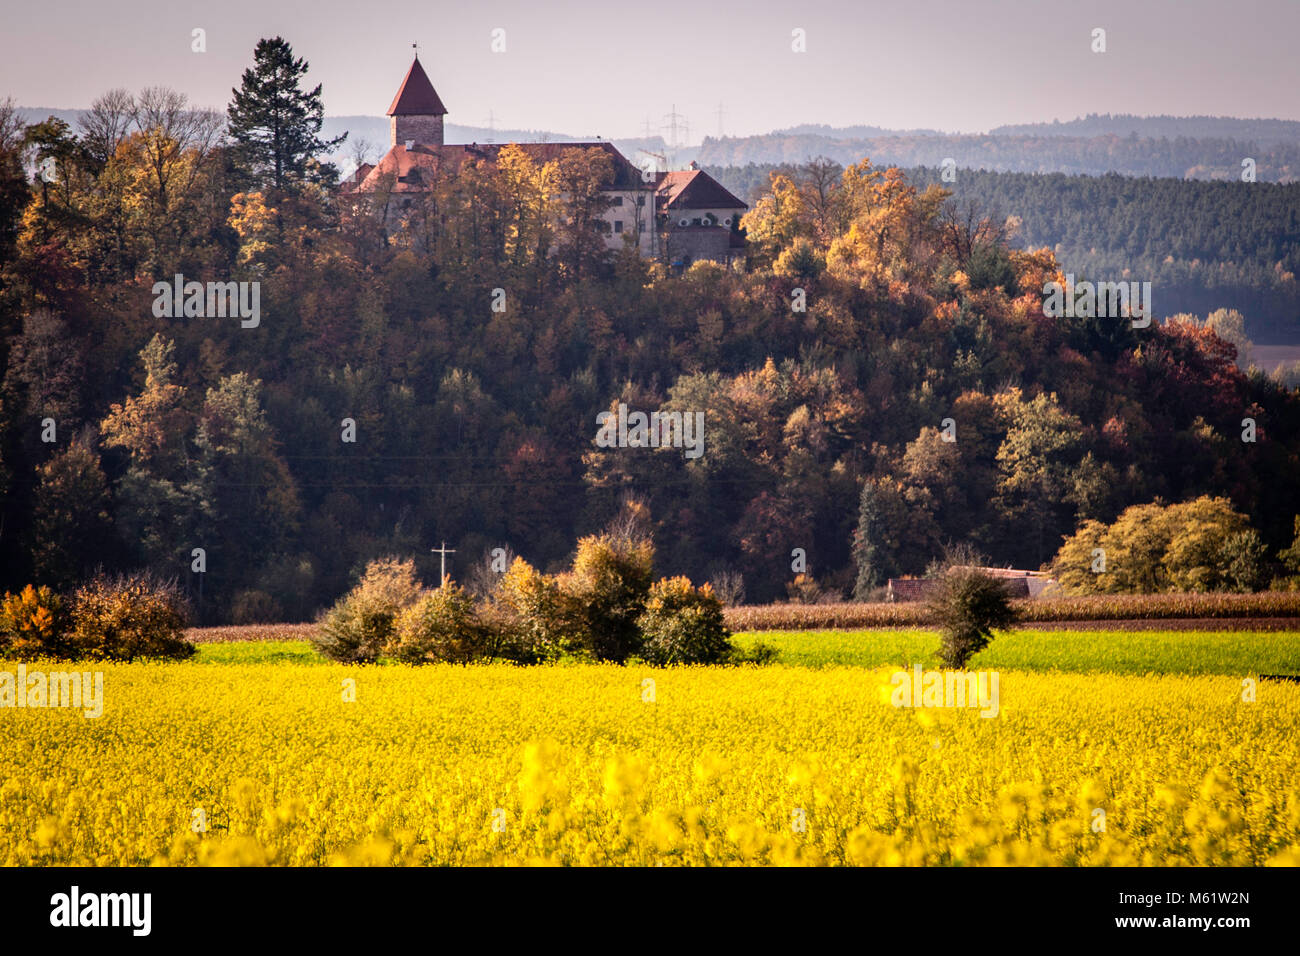 Wernberg Castle is situated on a mountain surrounded by mustard fields in Wernberg-Köblitz, Germany Stock Photo